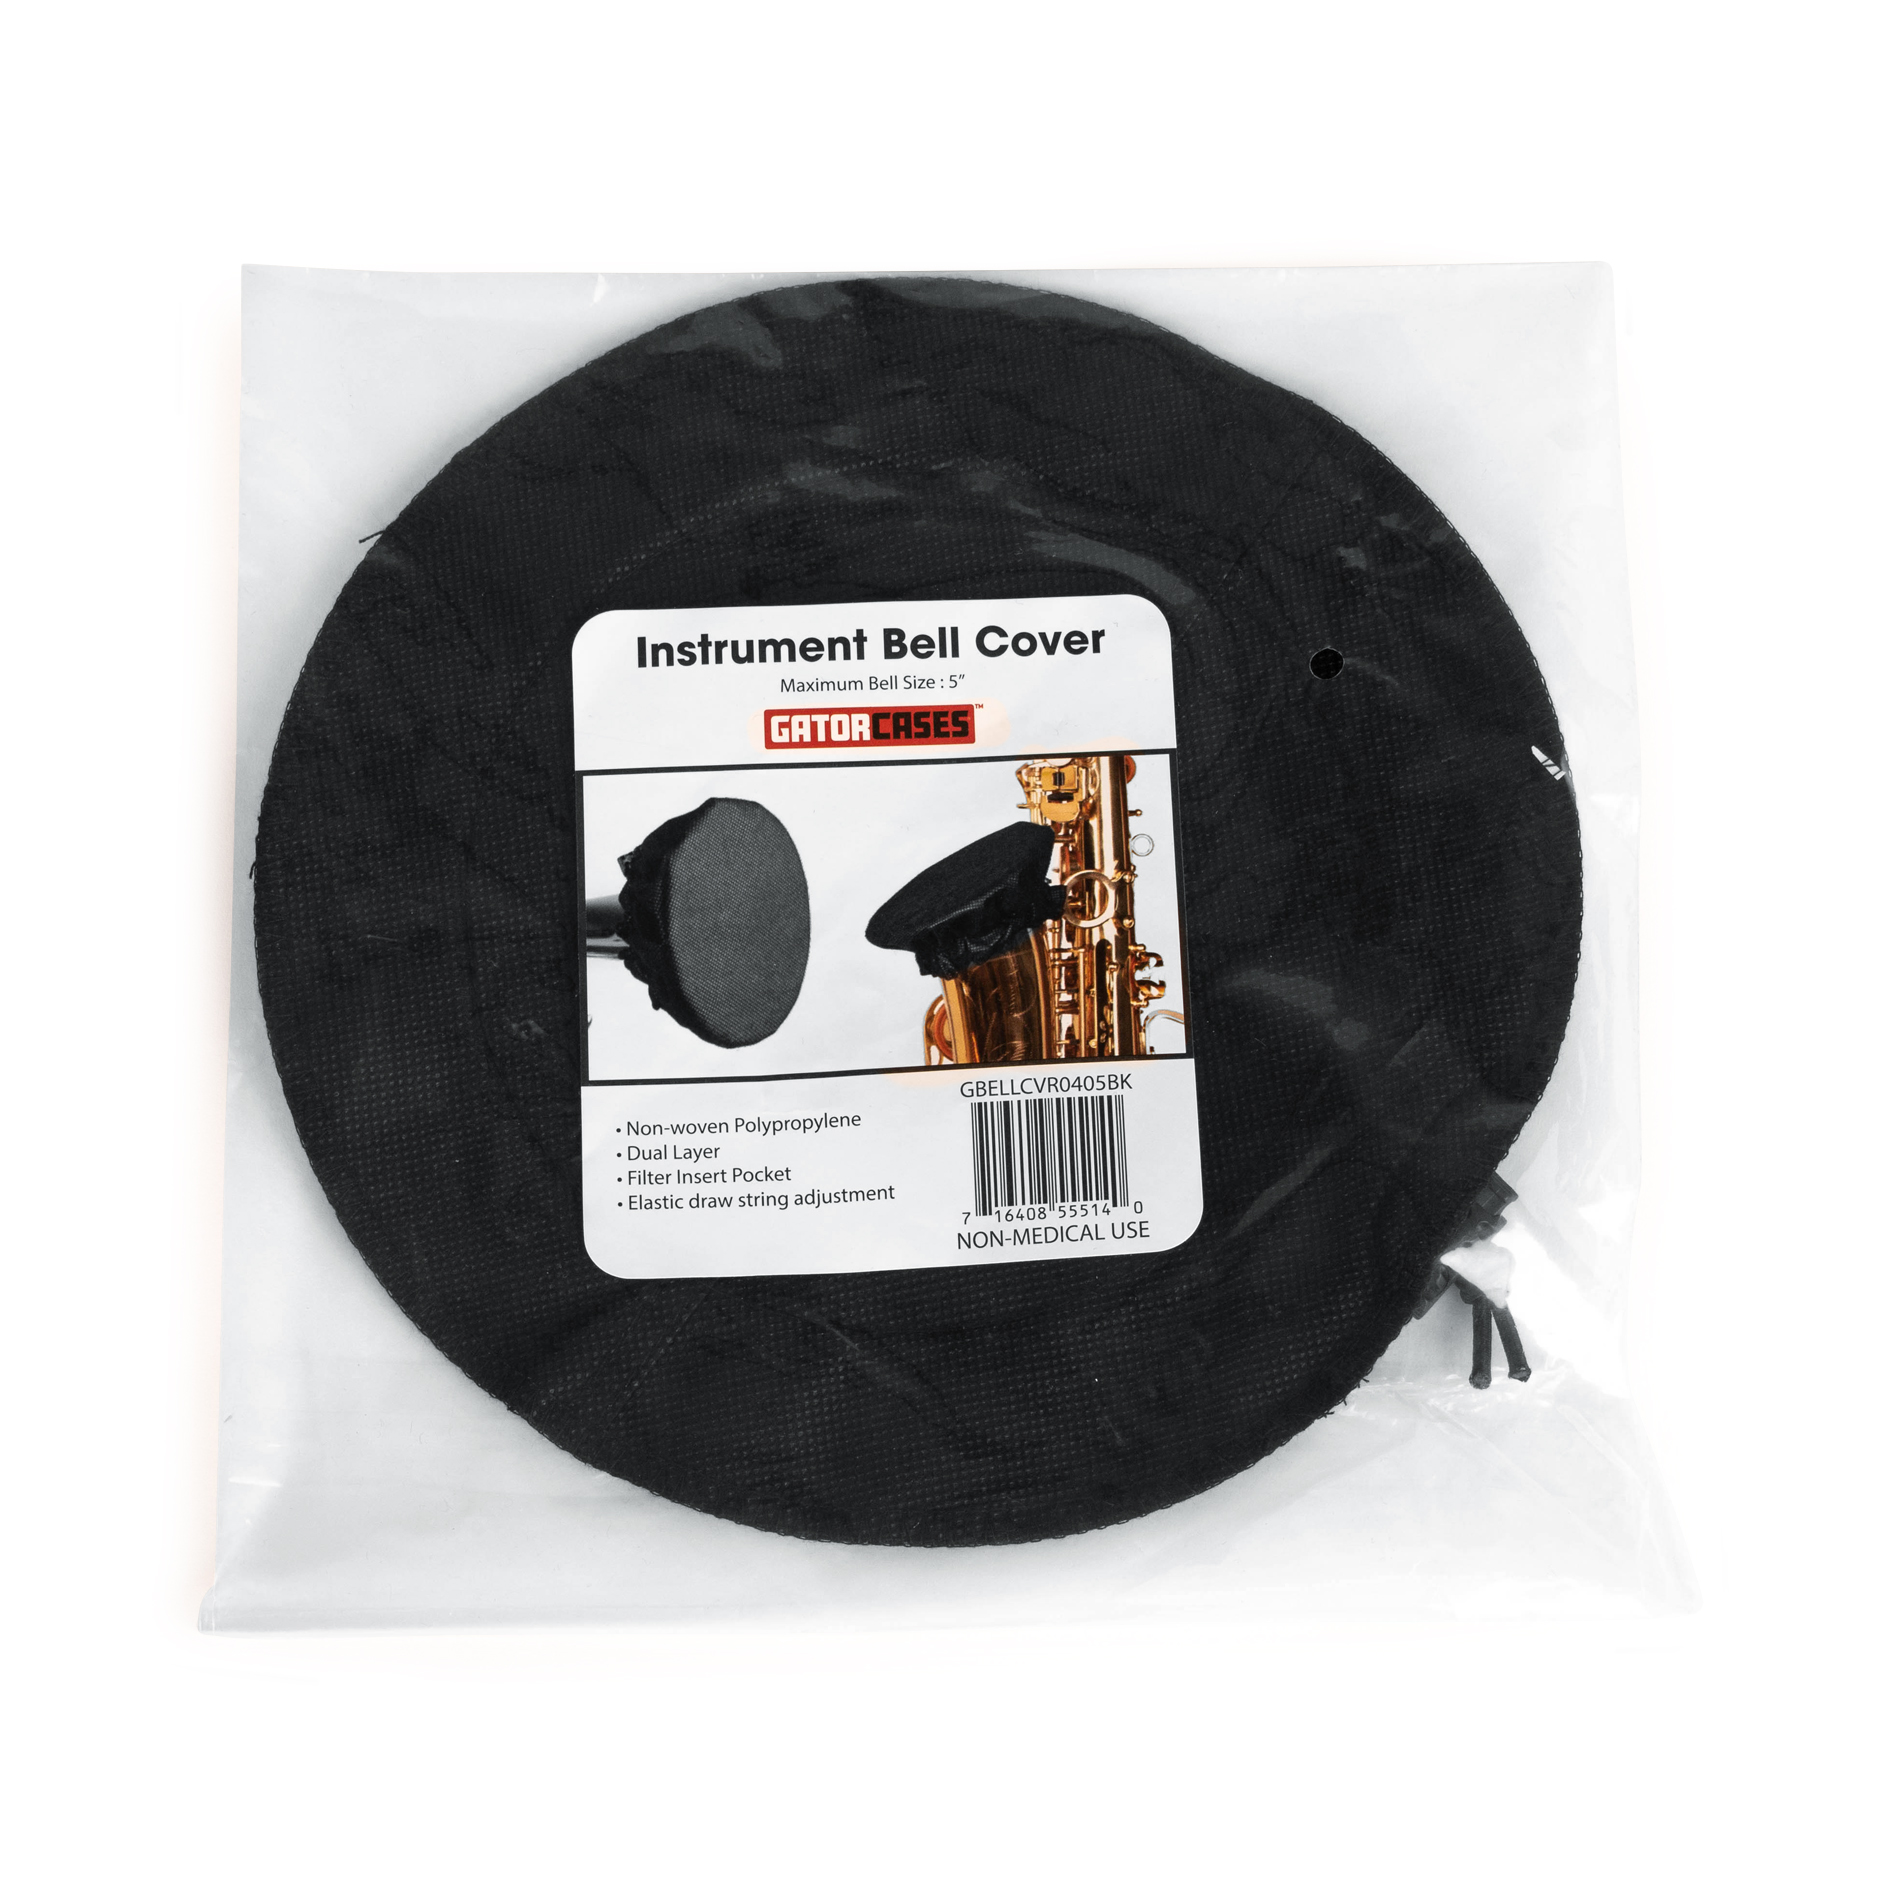 Black Bell Cover with MERV 13 filter, 10-11 Inches-GBELLCVR1011BK